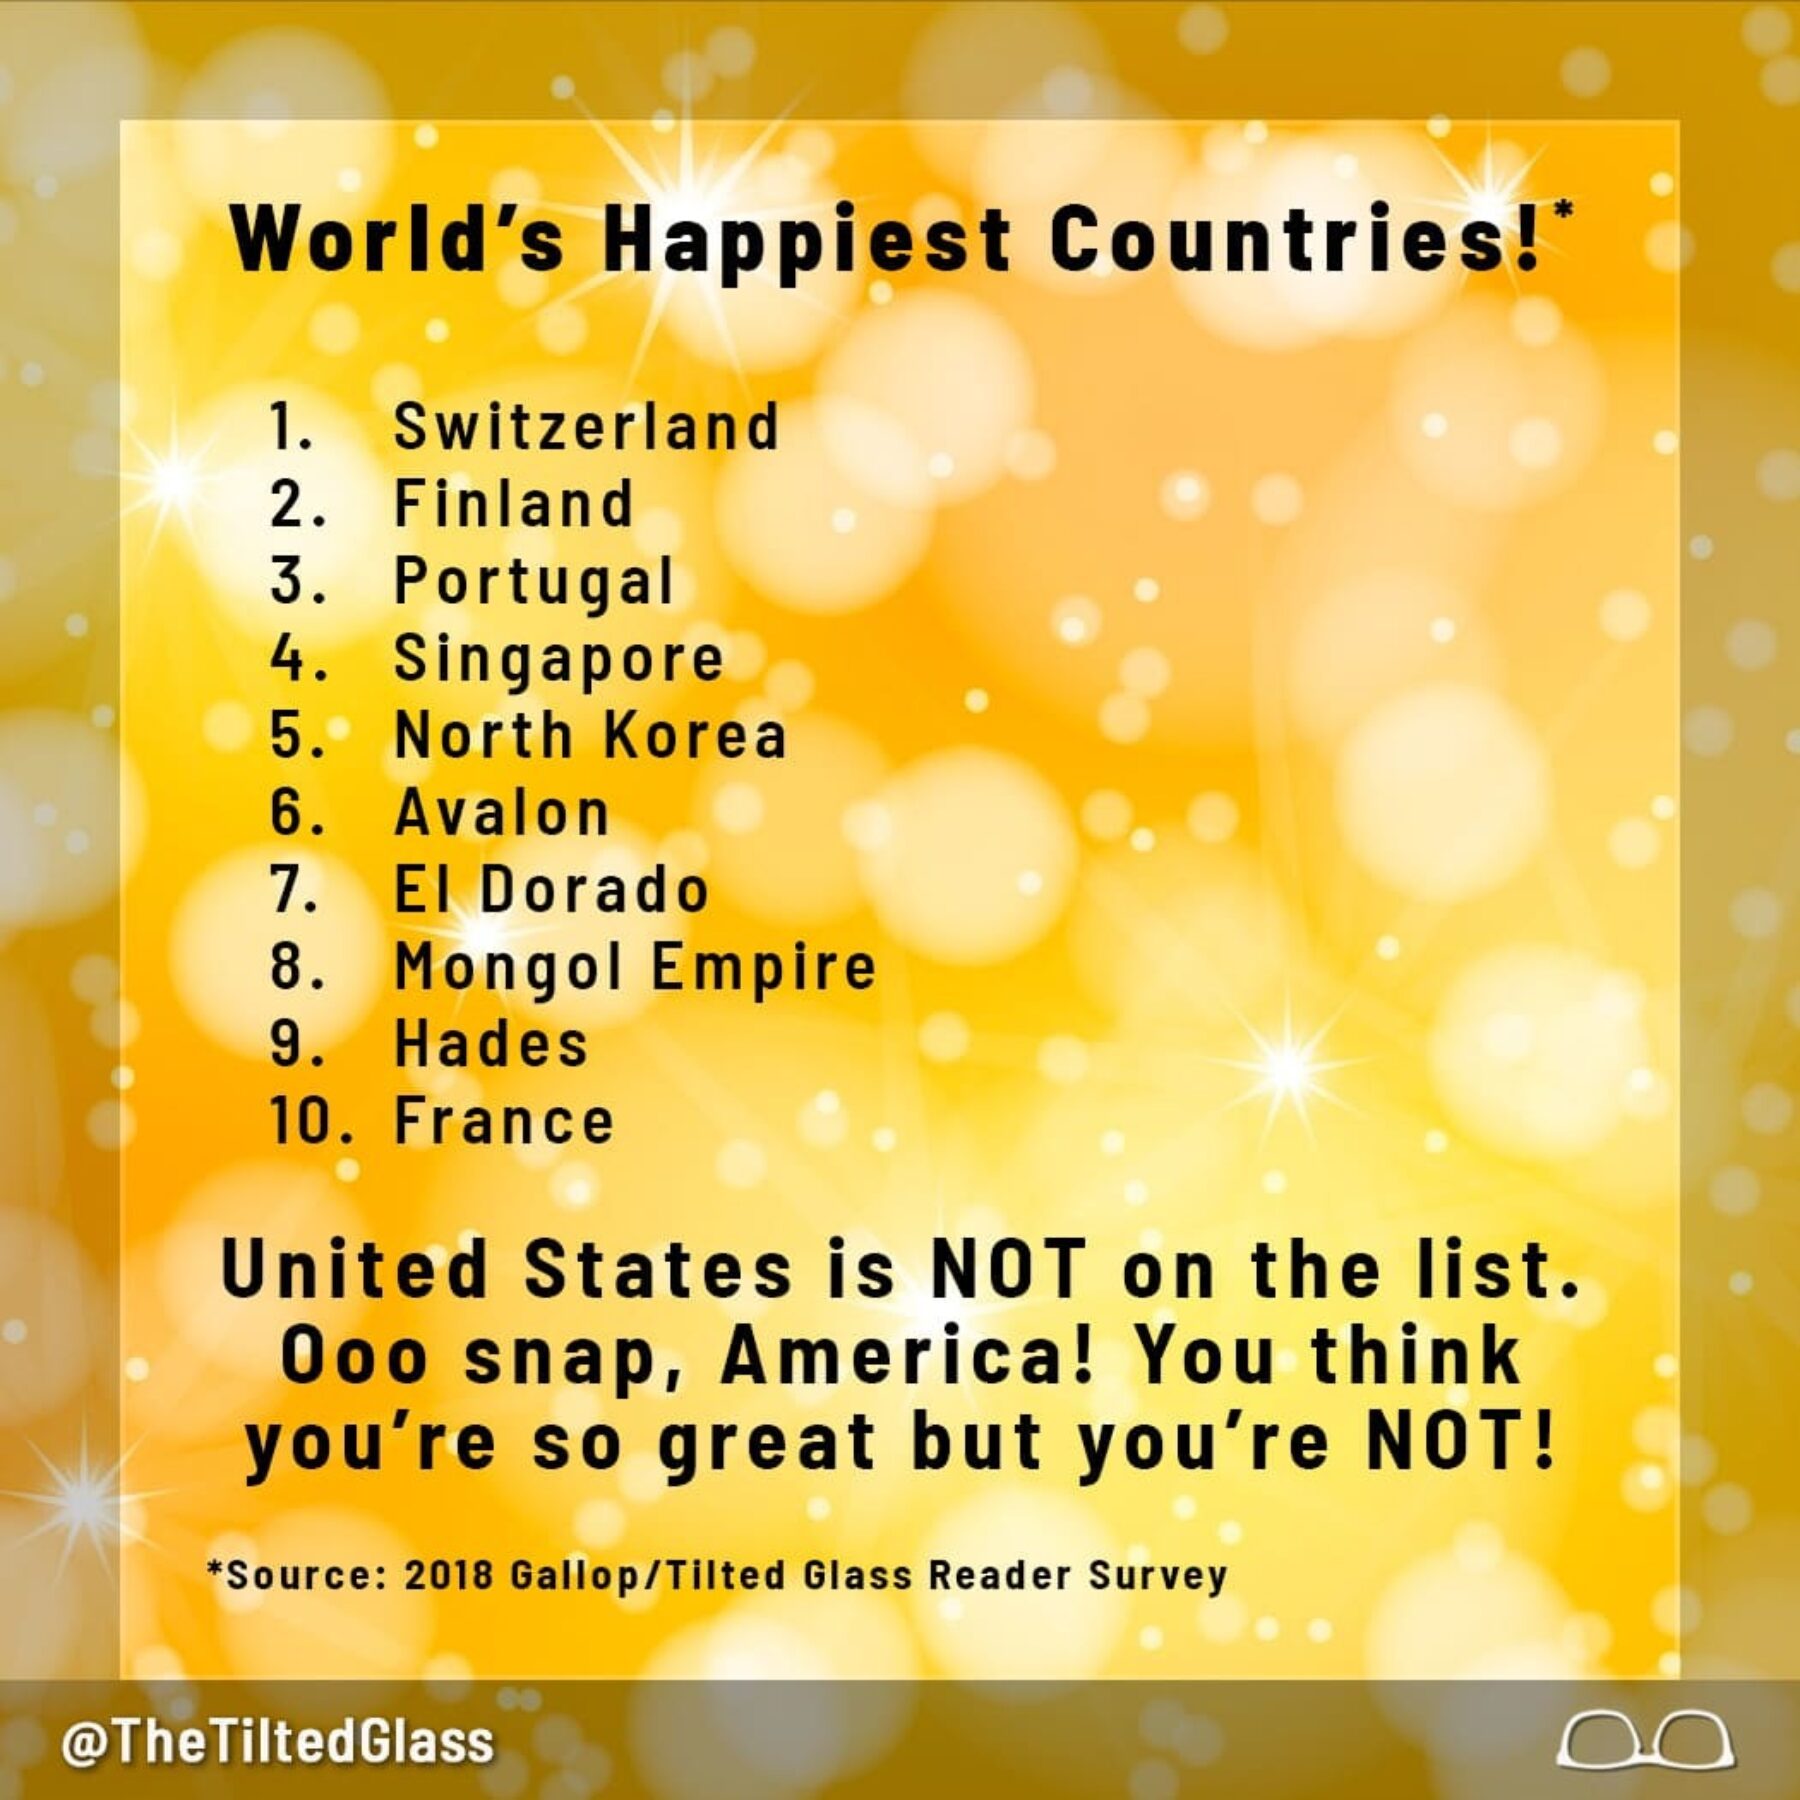 World’s Happiest Countries 2018